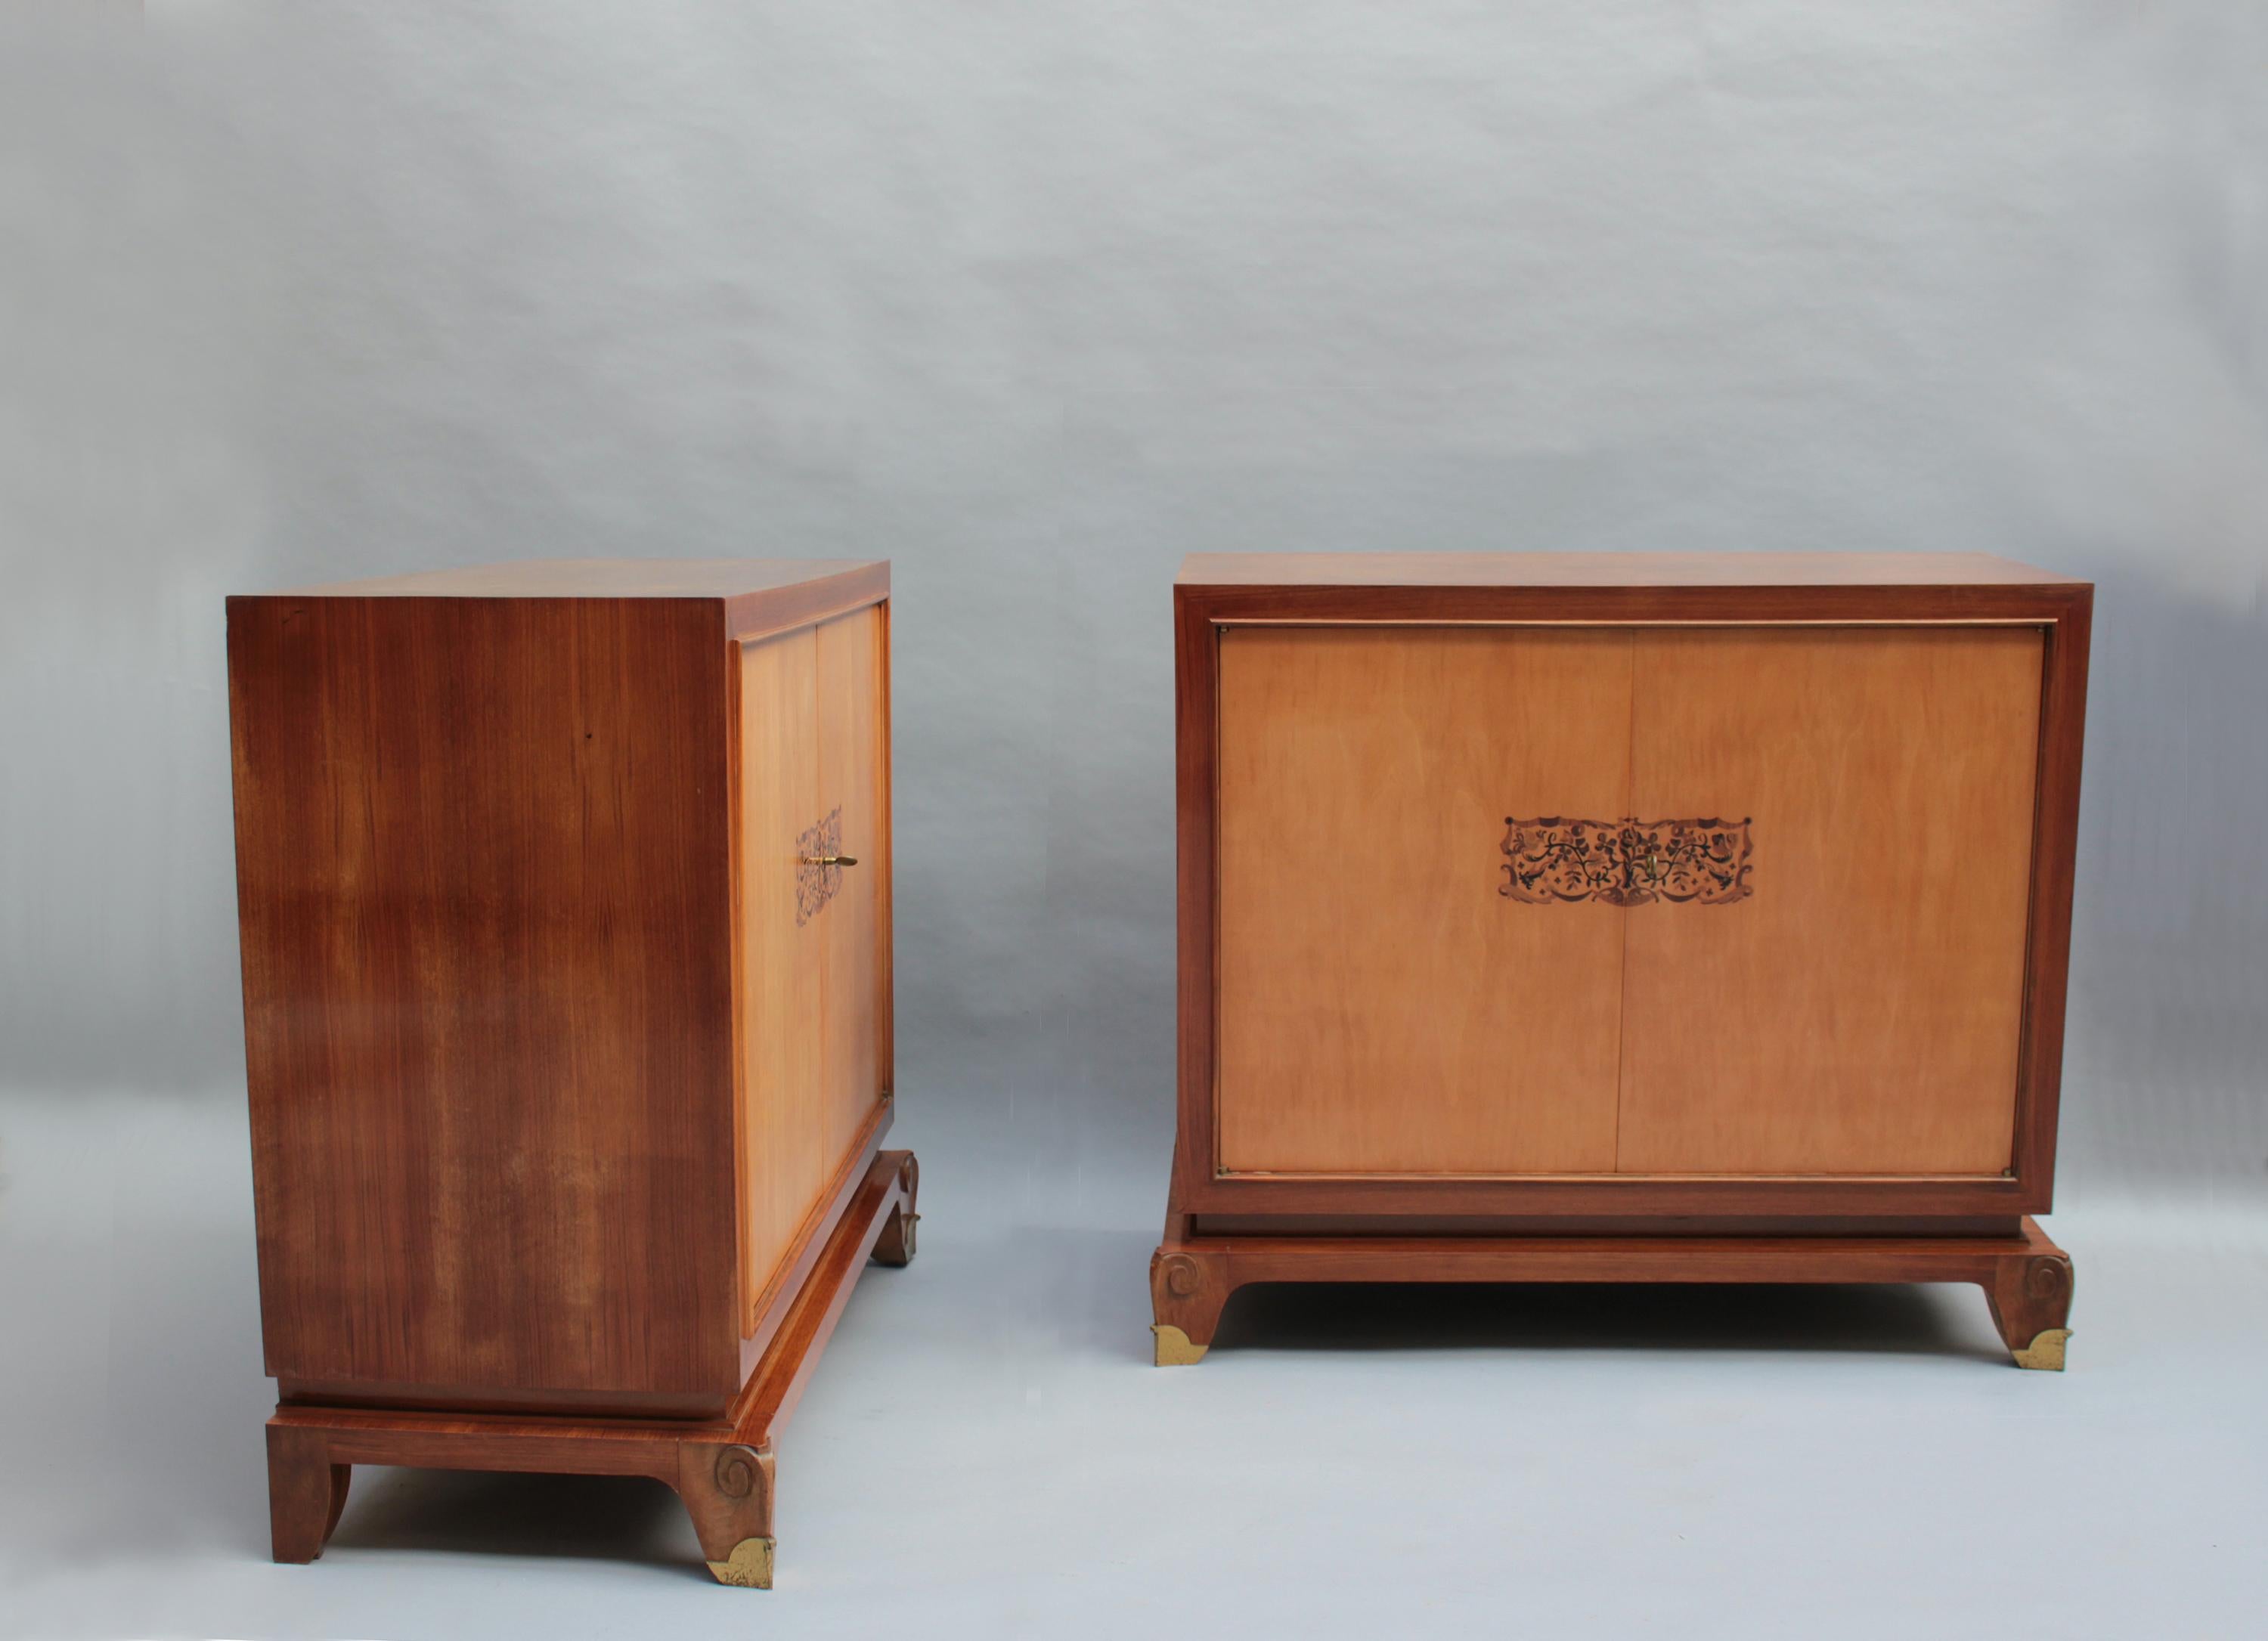 Jean Pascaud (1914-1996) - A rare pair of rosewood cabinets each fitted with a chest of 4 drawers, with two sycamore and marquetry doors. The base is adorned with two front carved scroll feet with bronze sabots.
Can be used as nightstands.